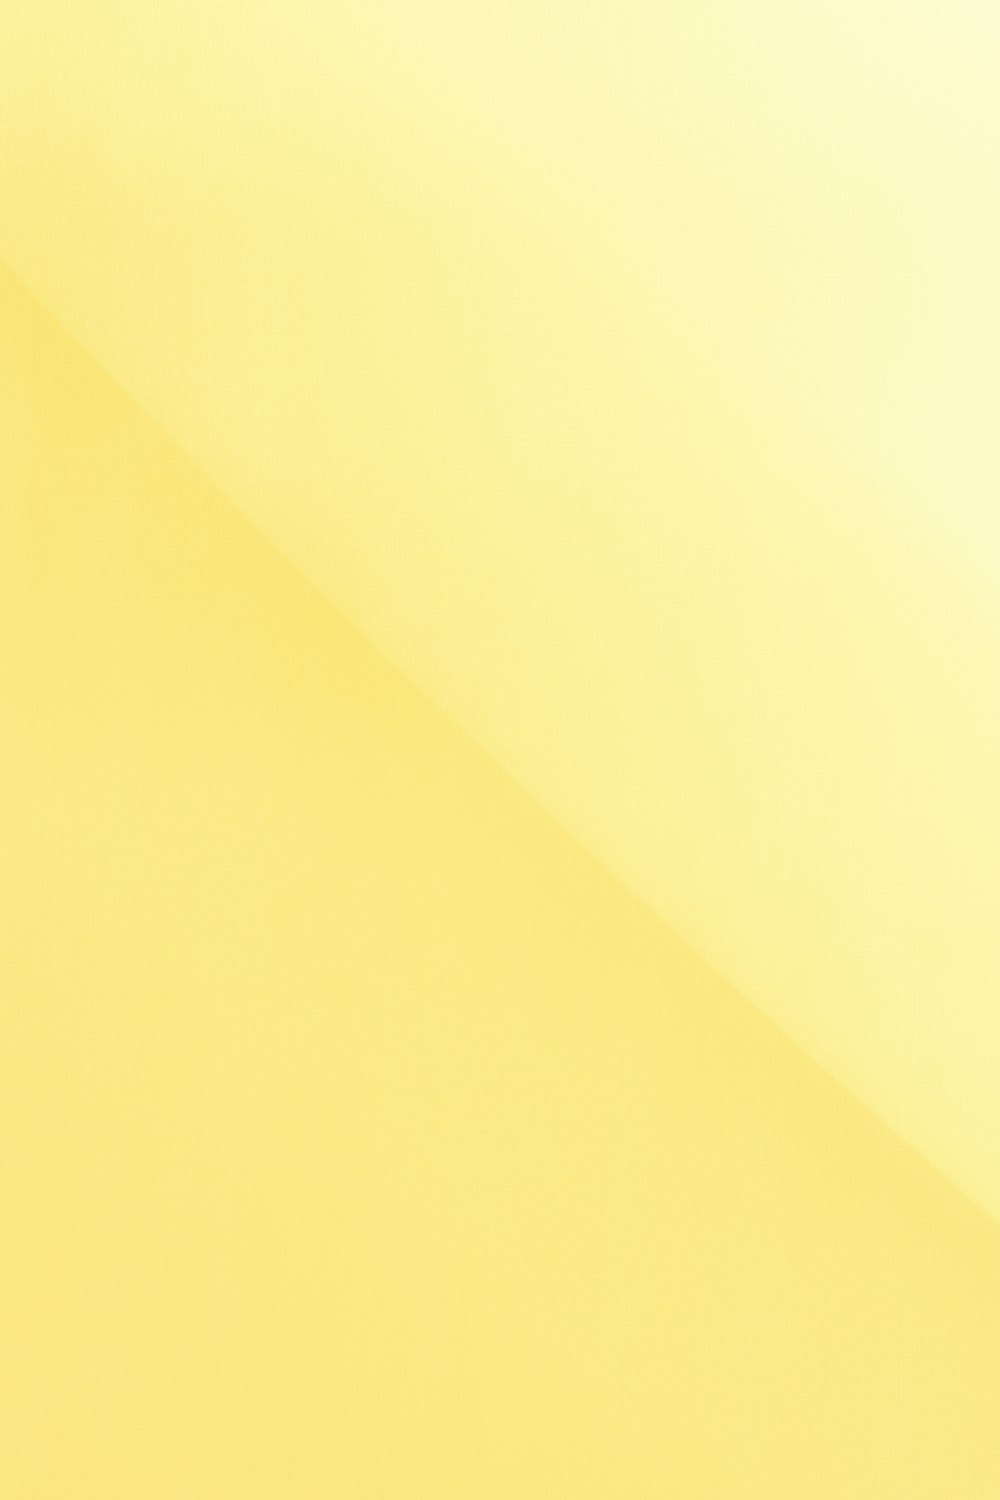 Yellow Off White Wallpapers - Wallpaper Cave